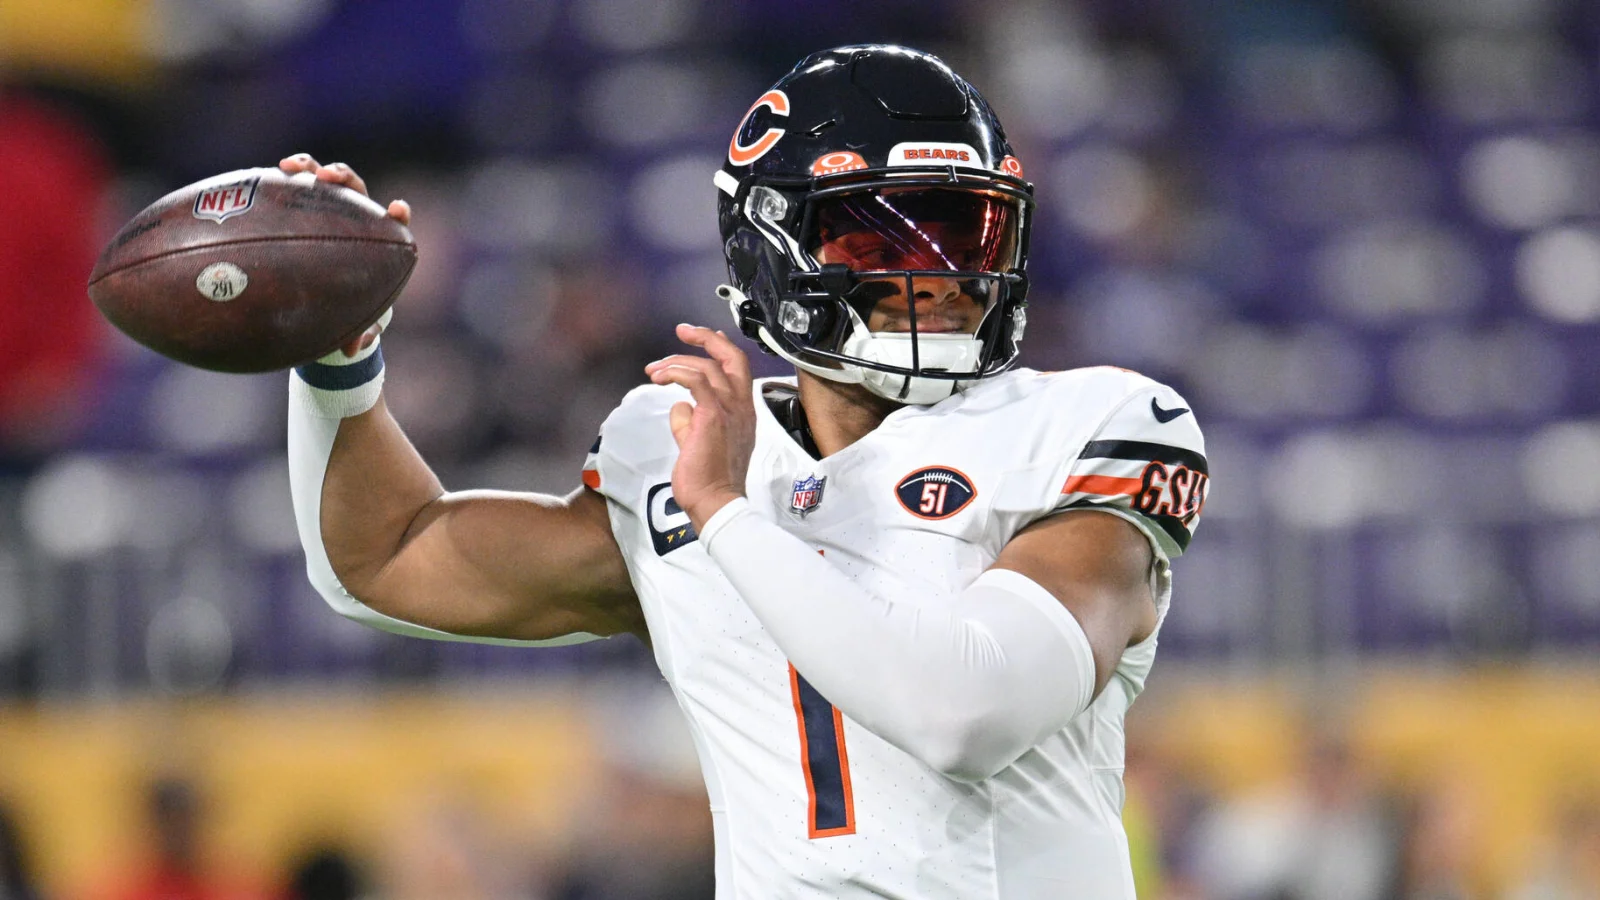 Chicago Bears at a Crossroads The Future of Justin Fields and the QB Trade Drama Unfolds-